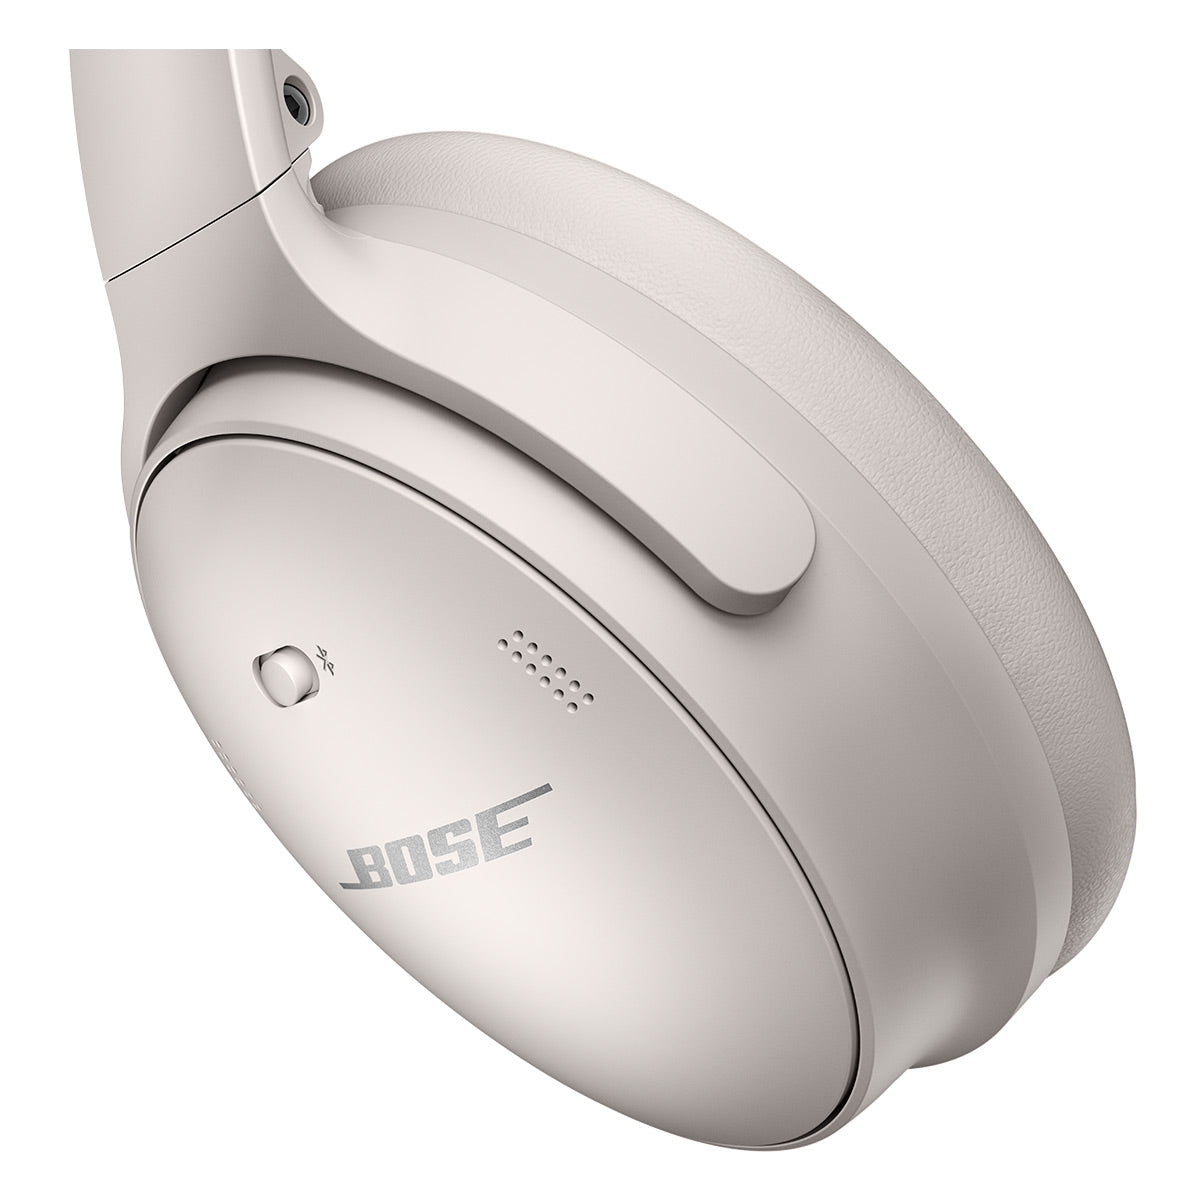 Bose QuietComfort 45 Wireless Noise Canceling Headphones (White) and Bose Smart Soundbar 900 with Dolby Atmos (White)